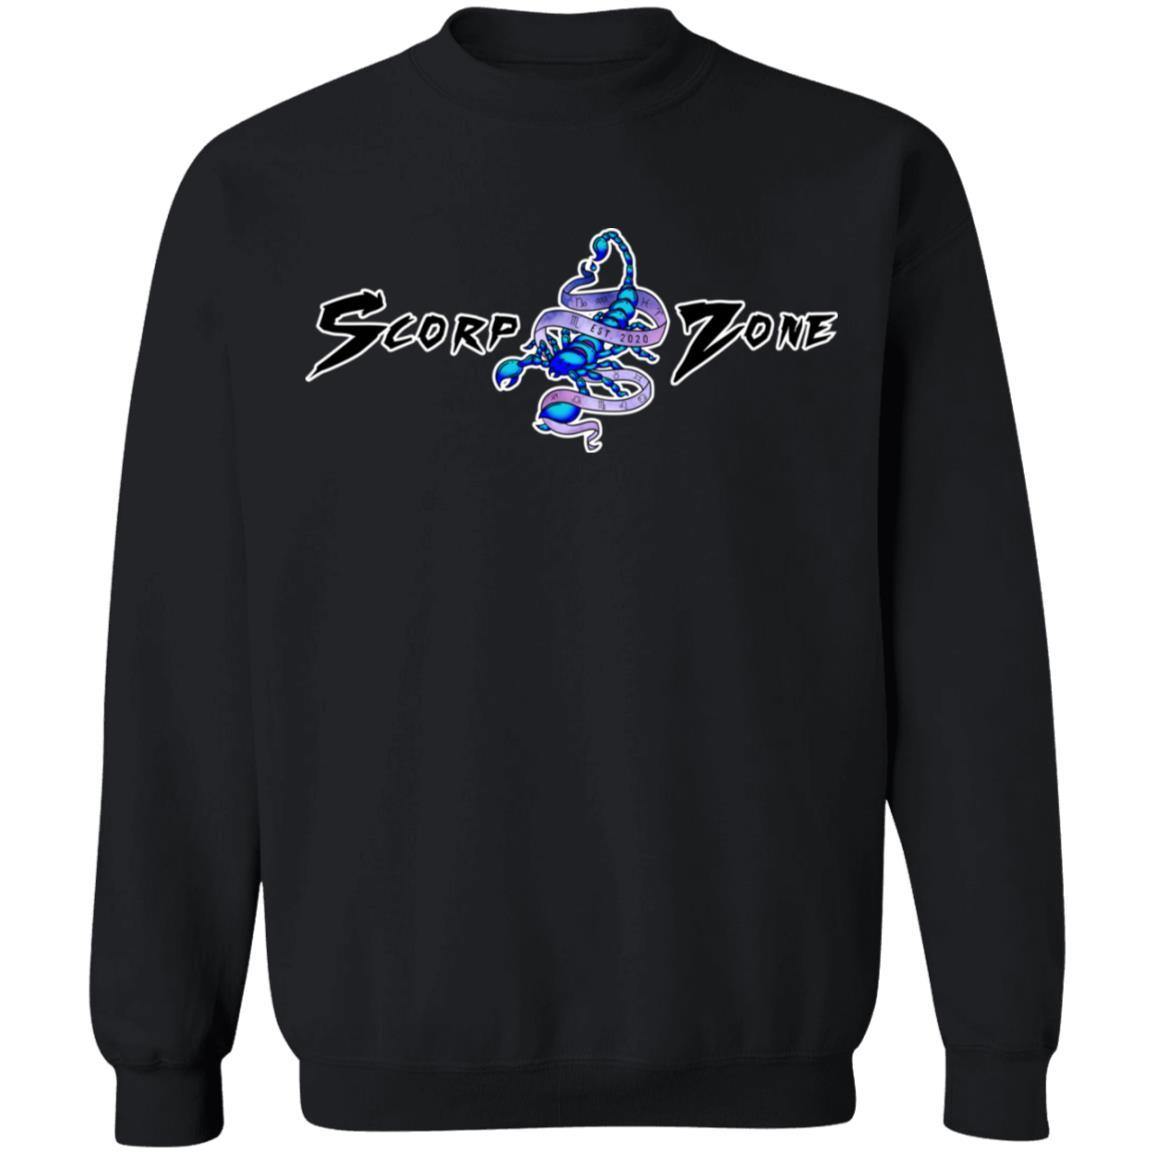 VIRGO DESIGN ON BACK AND SMALL SCORP ZONE LOGO ON FRONT -Z65 Crewneck Pullover Sweatshirt - ScorpZone